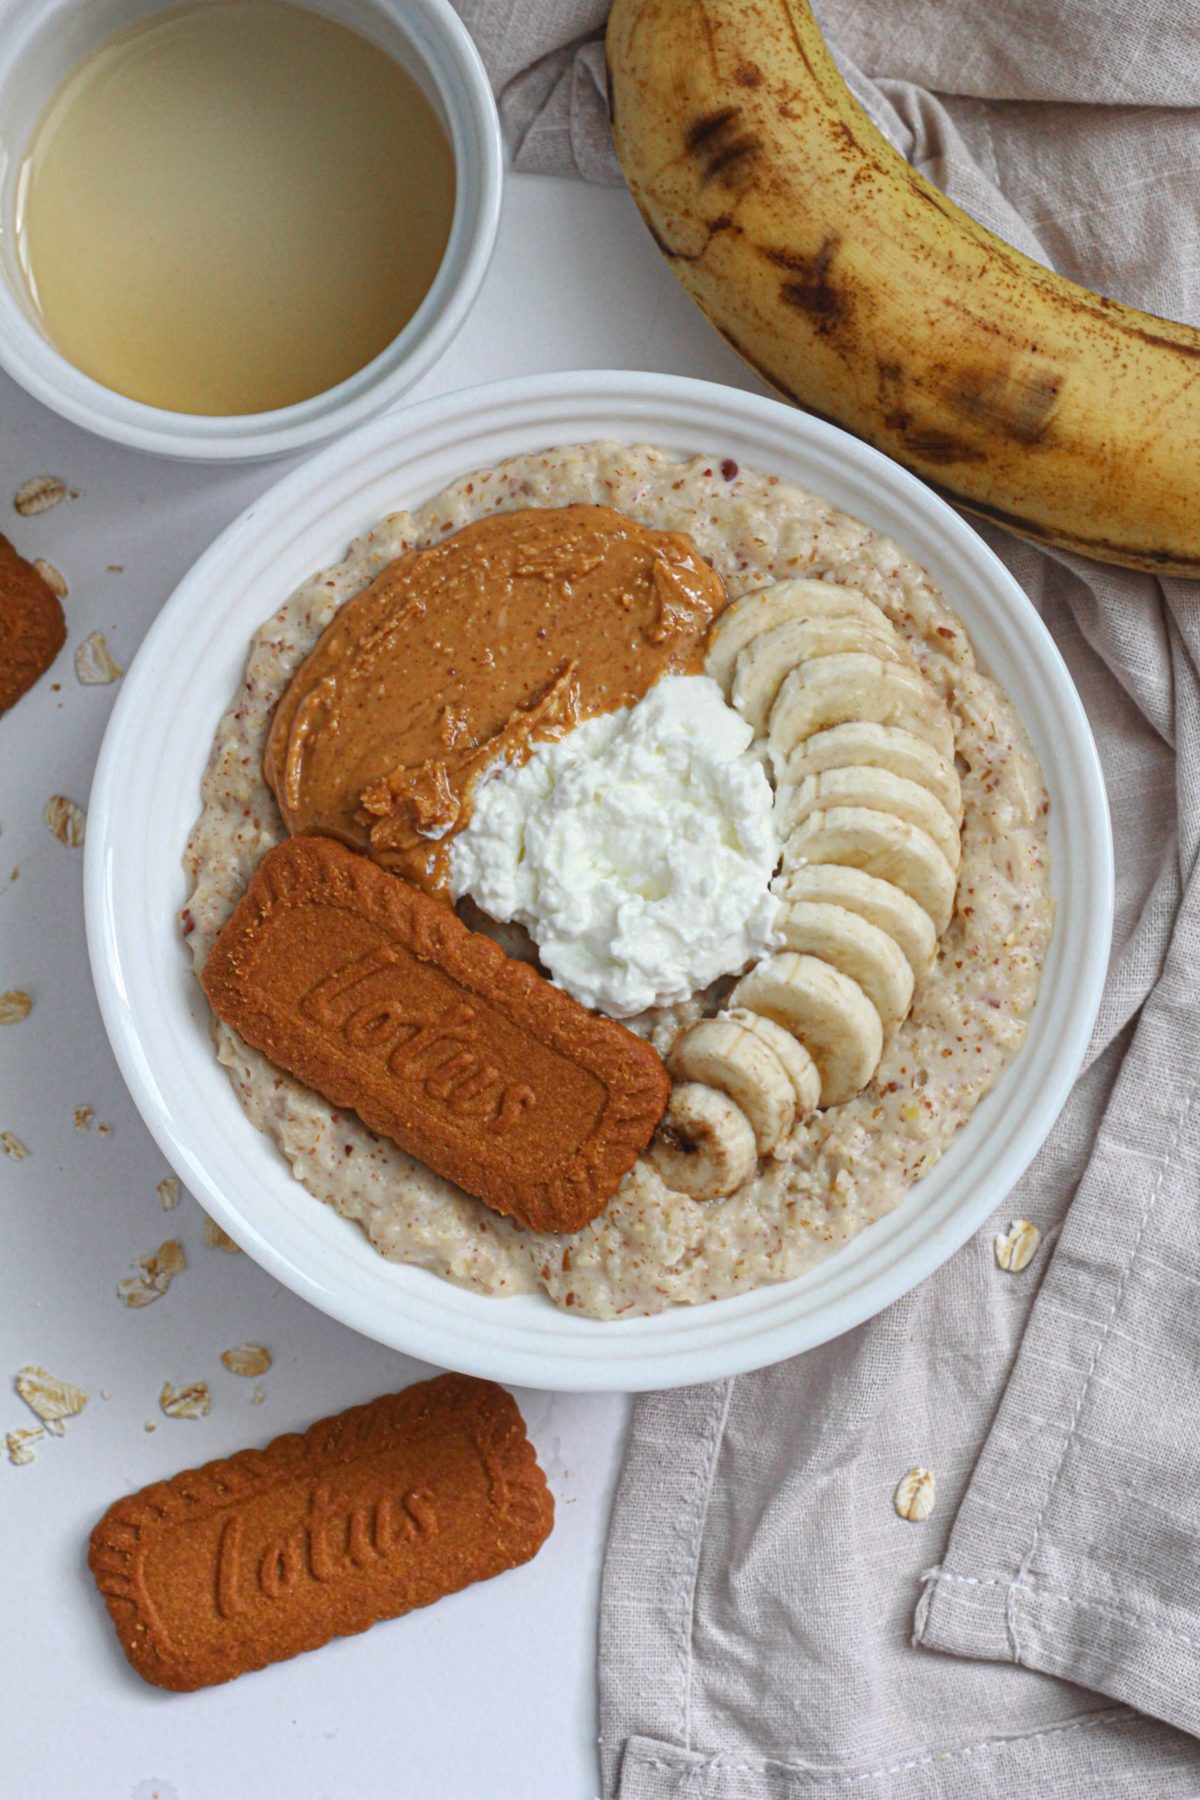 Peanut Butter Oatmeal Recipe (Stovetop or Microwave)